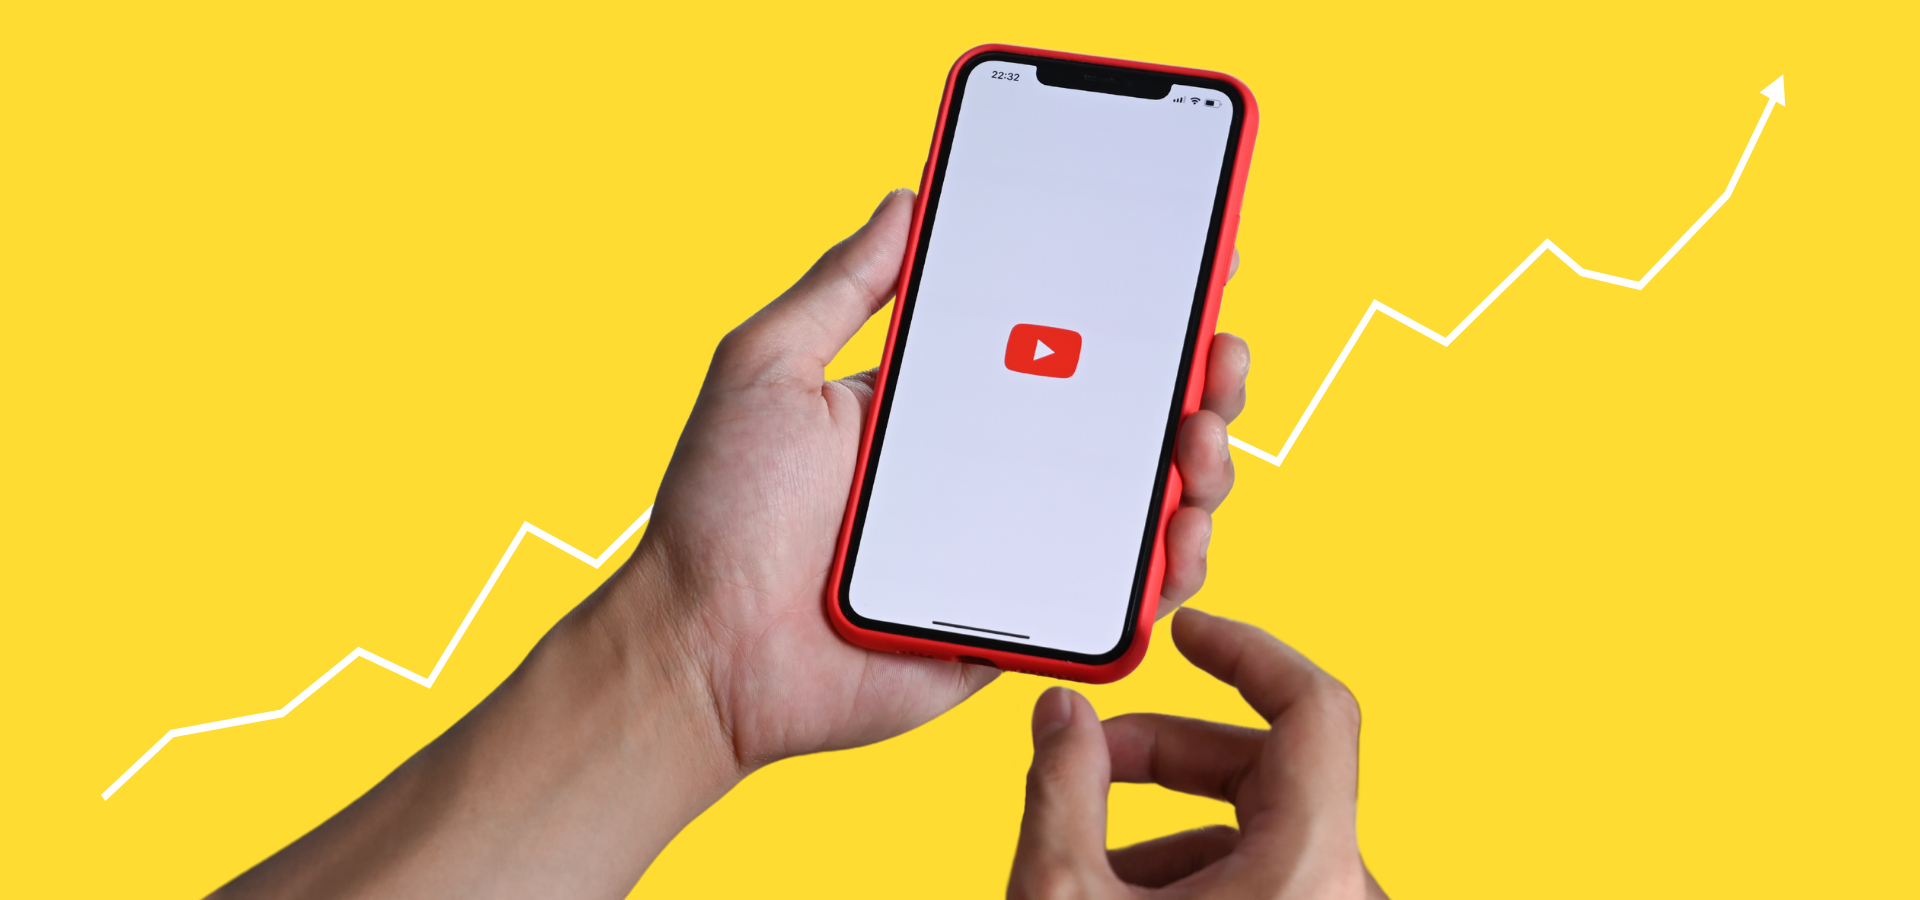 Yellow background with hands holding a phone with the YouTube logo on it.